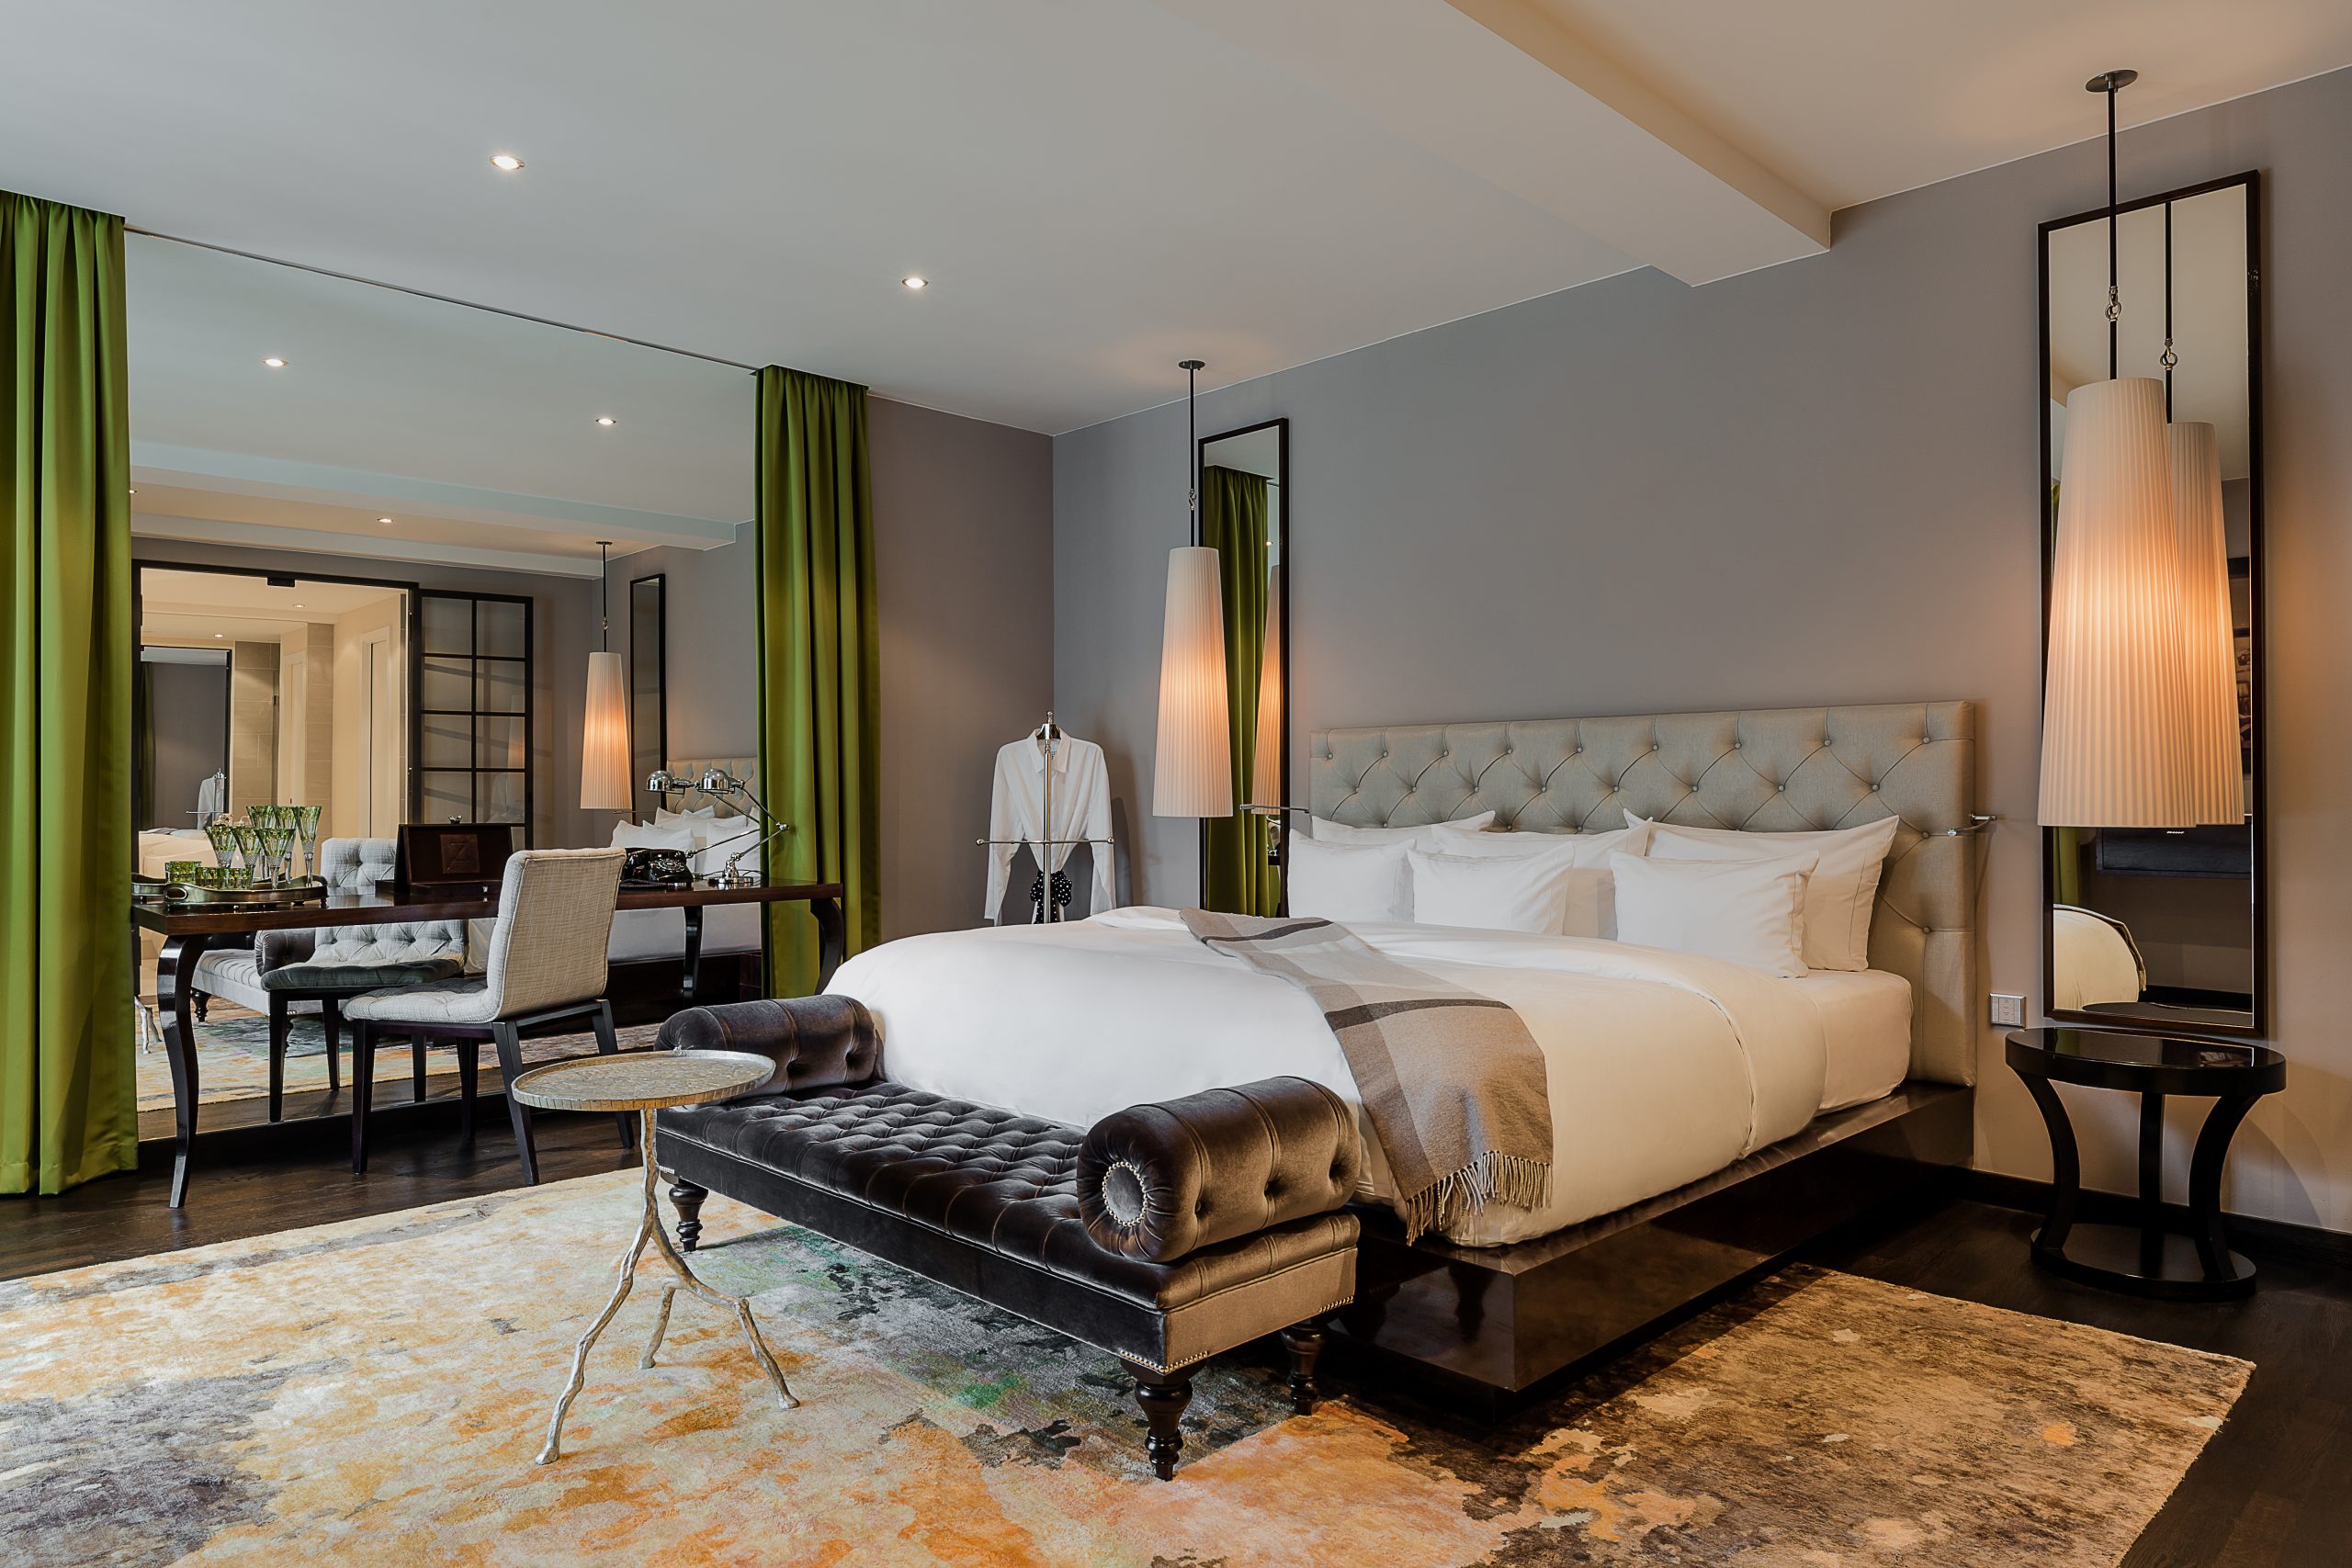 Hotel Zoo Berlin: A High-End Bundle Of Luxury And History